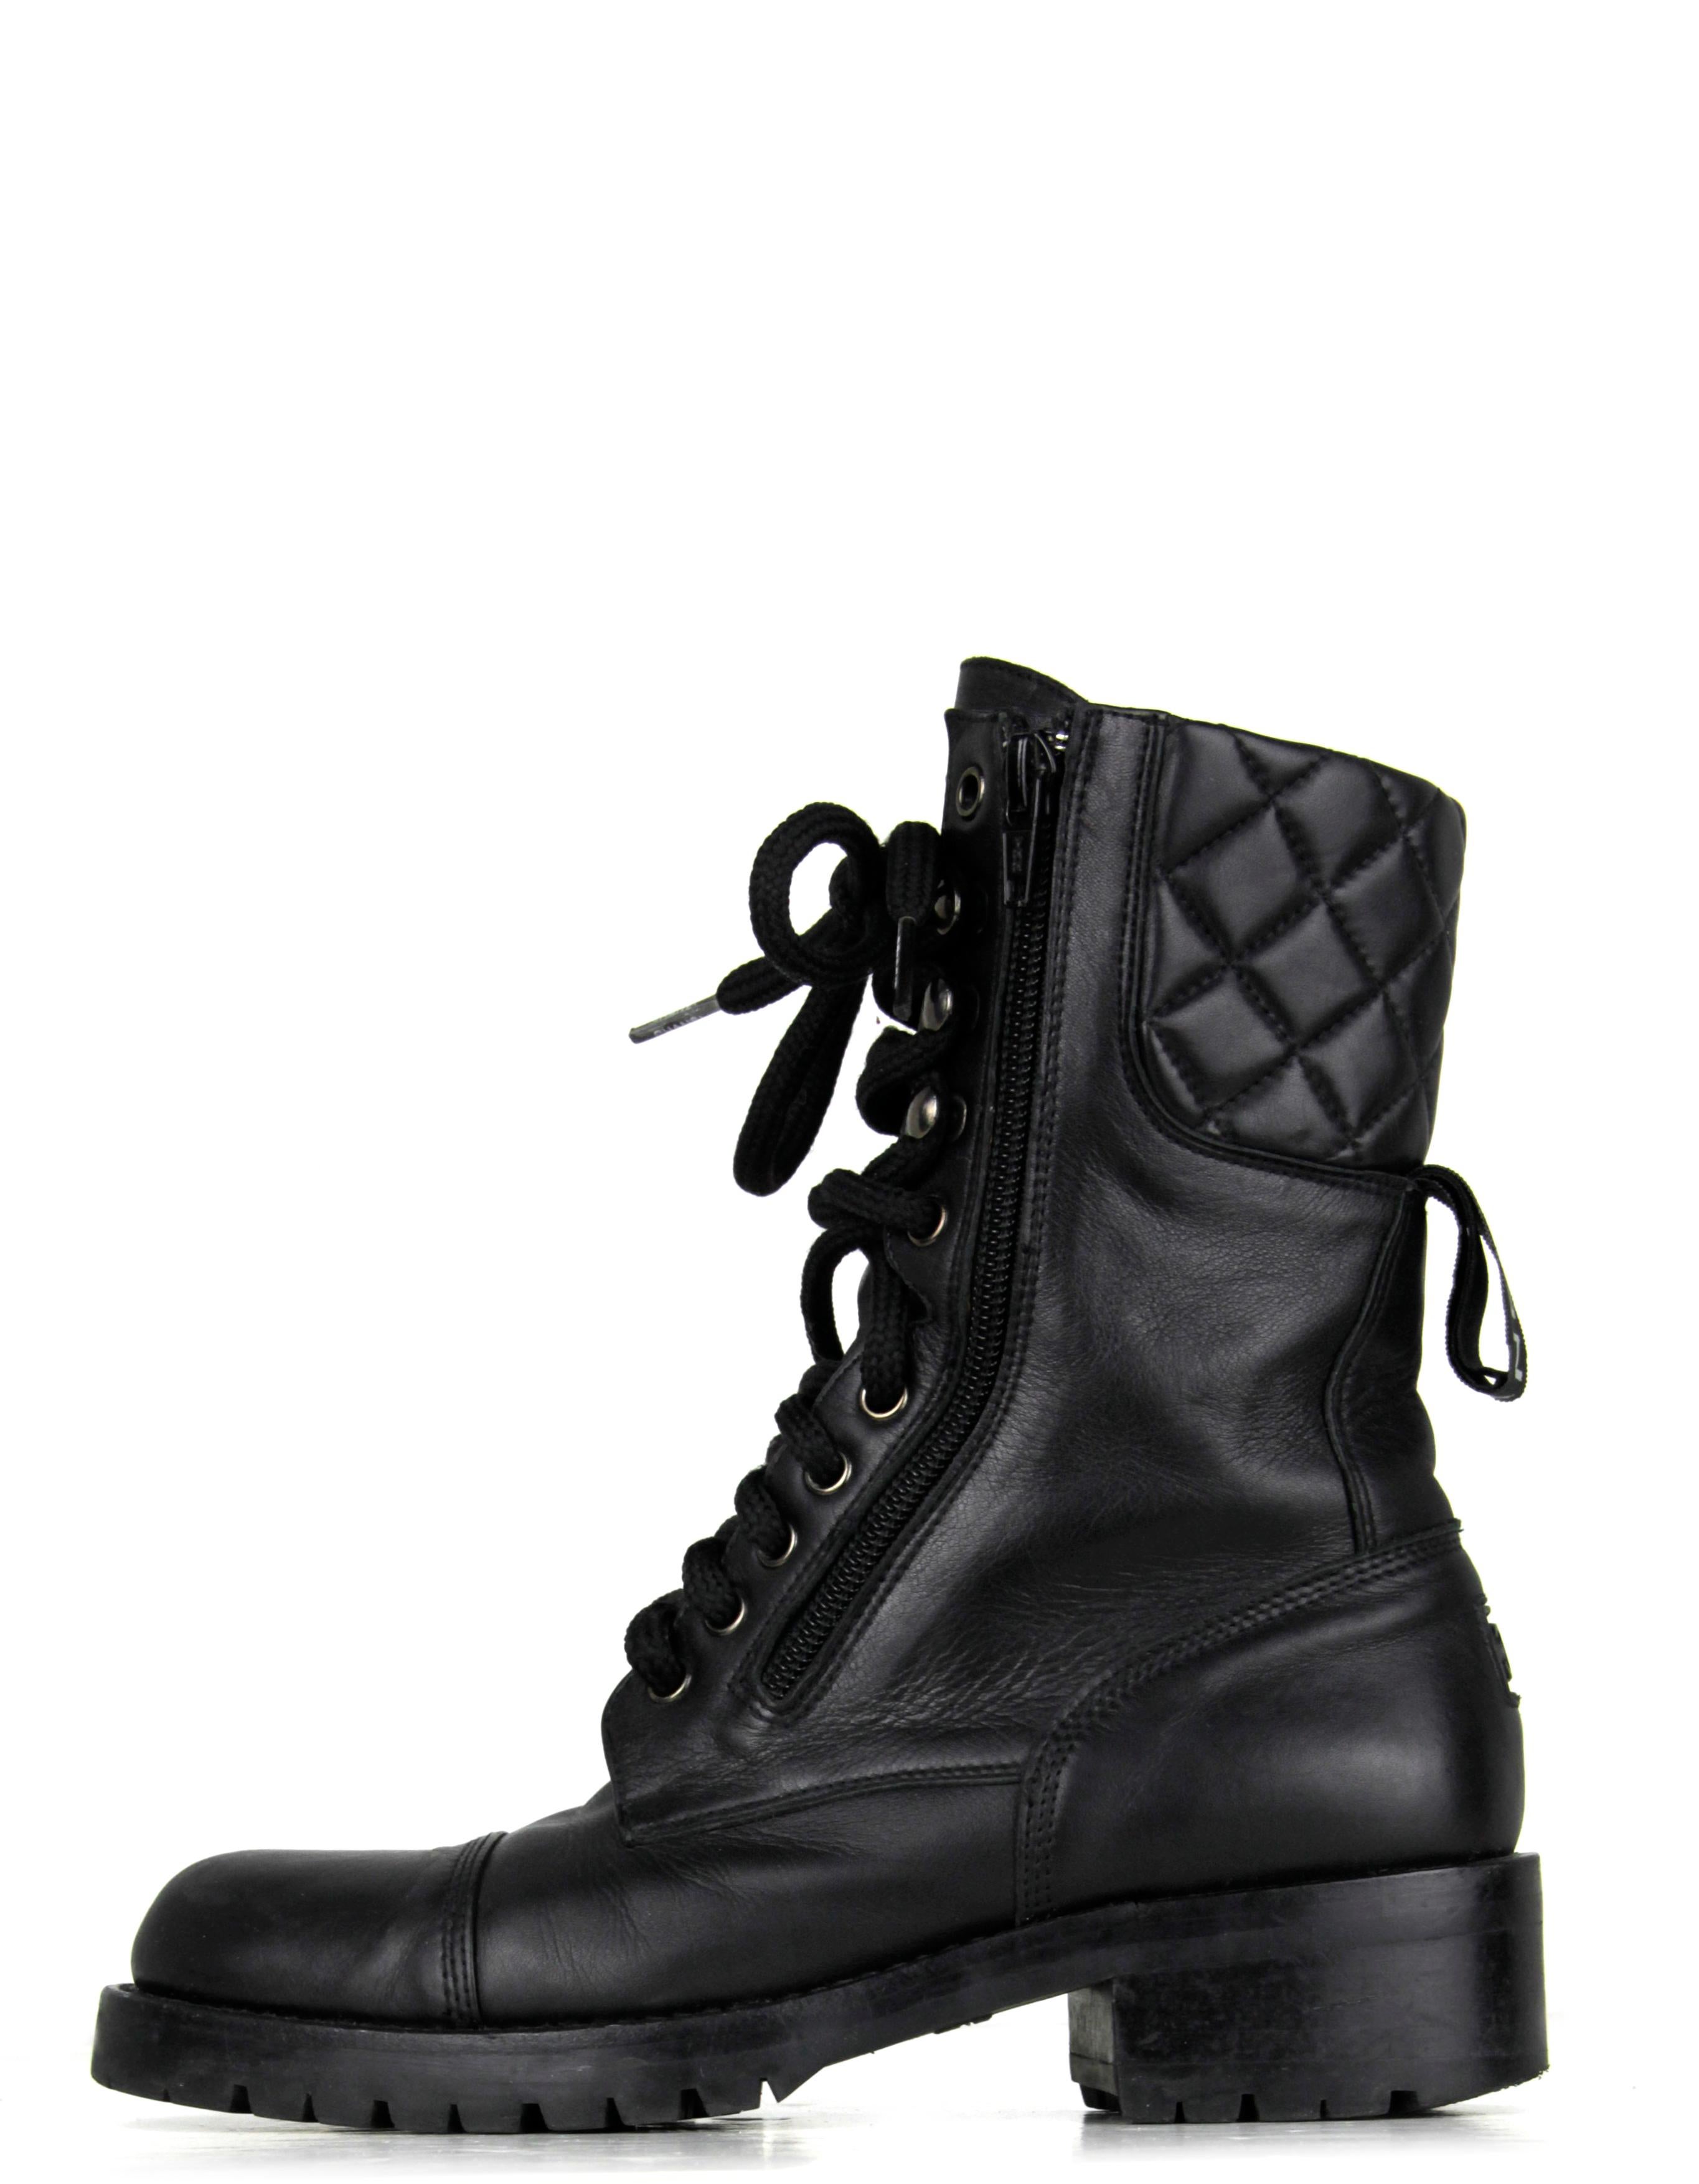 Chanel Vintage Black Leather Lace Up Combat Boots. Features quilted detail and CC detail and CHANEL pull at back of boot

Made In: Spain
Color: Black
Materials: Leather
Closure/Opening: Lace up and double sided zippers
Sole Stamp: Chanel Made in